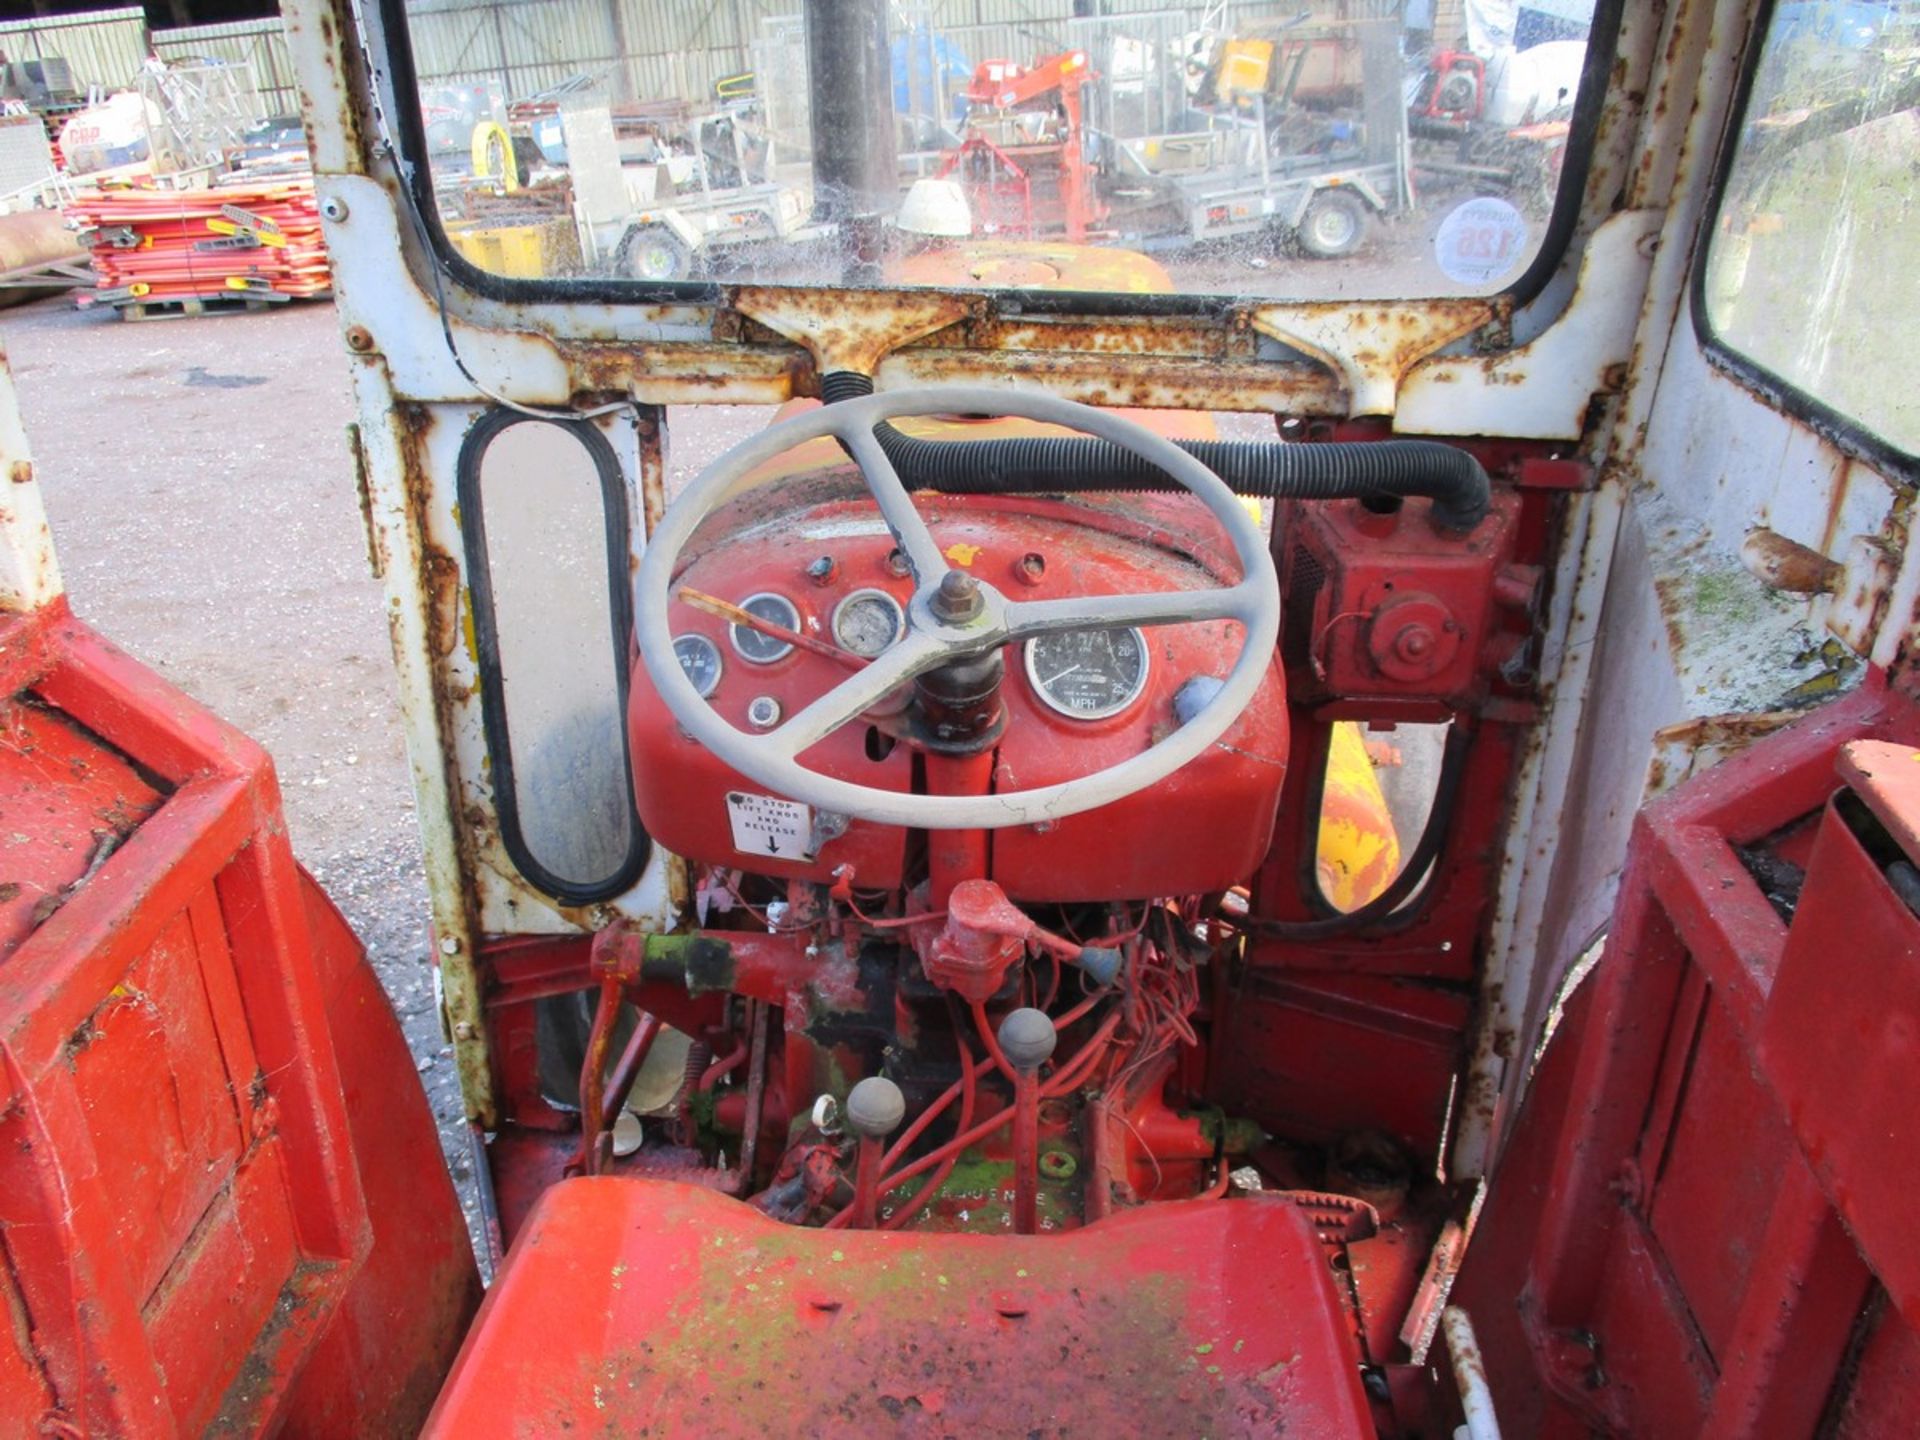 DAVID BROWN 990 TRACTOR - Image 4 of 4